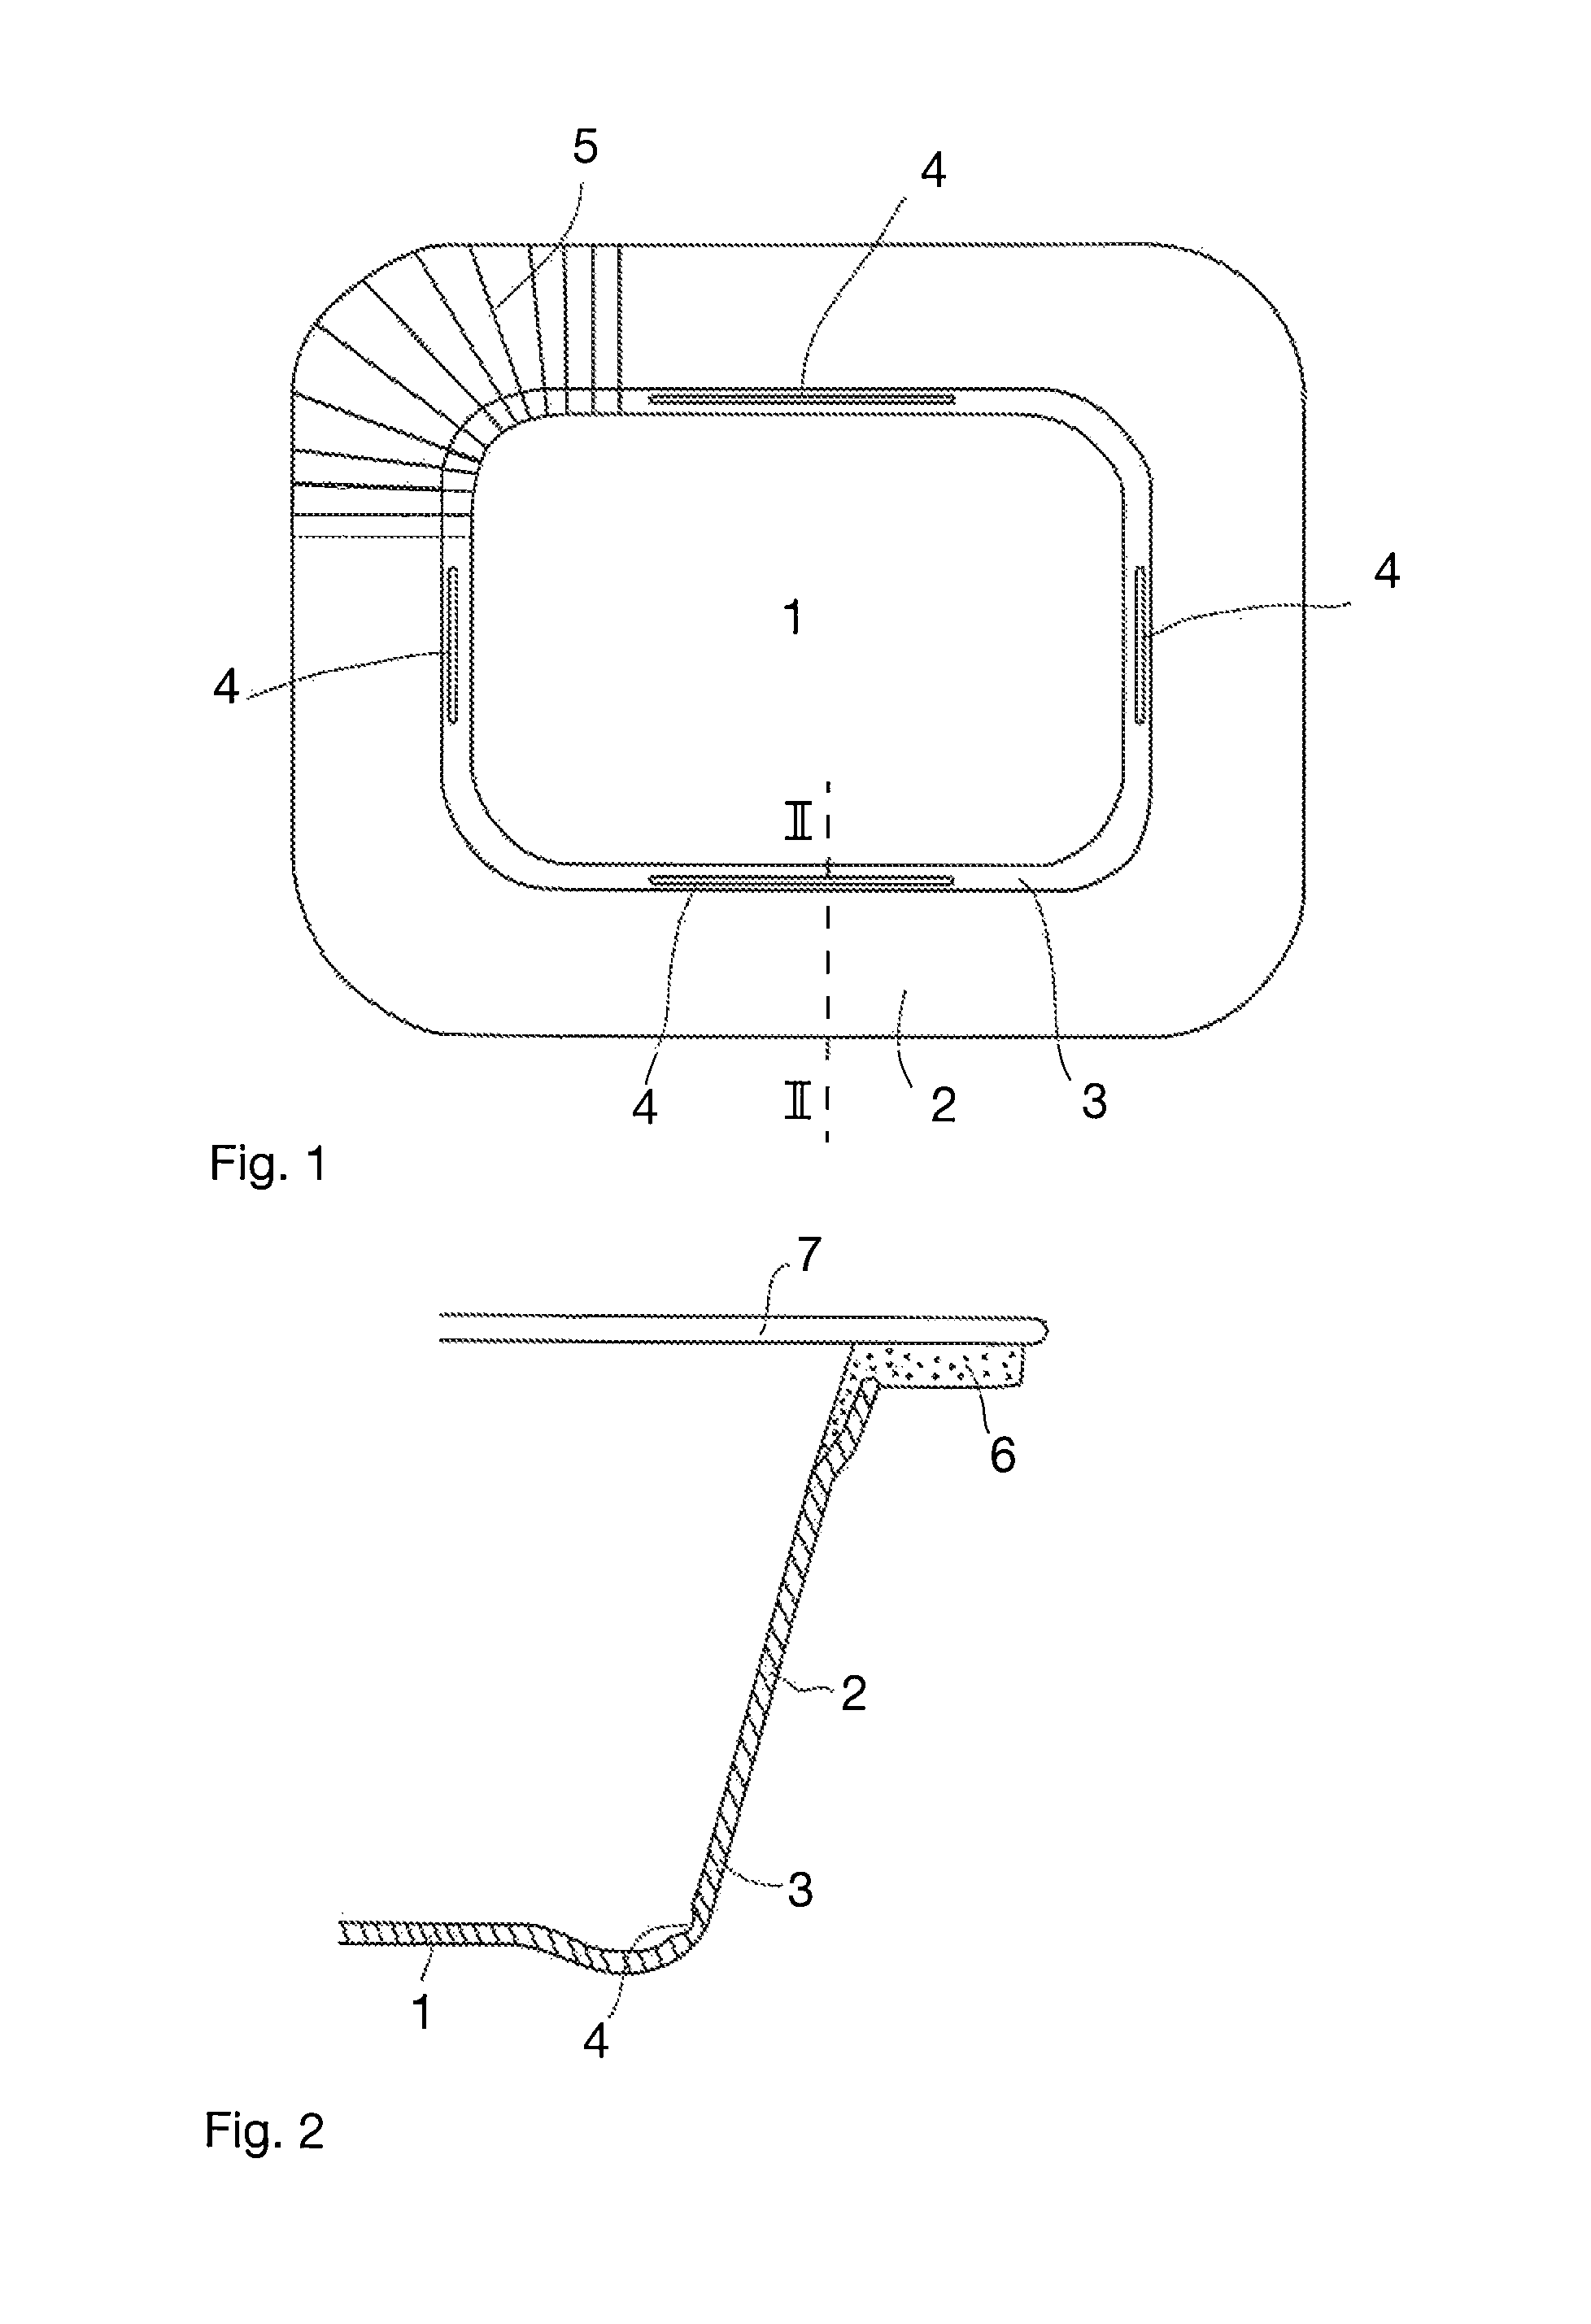 Method for forming a package, a package and a package blank